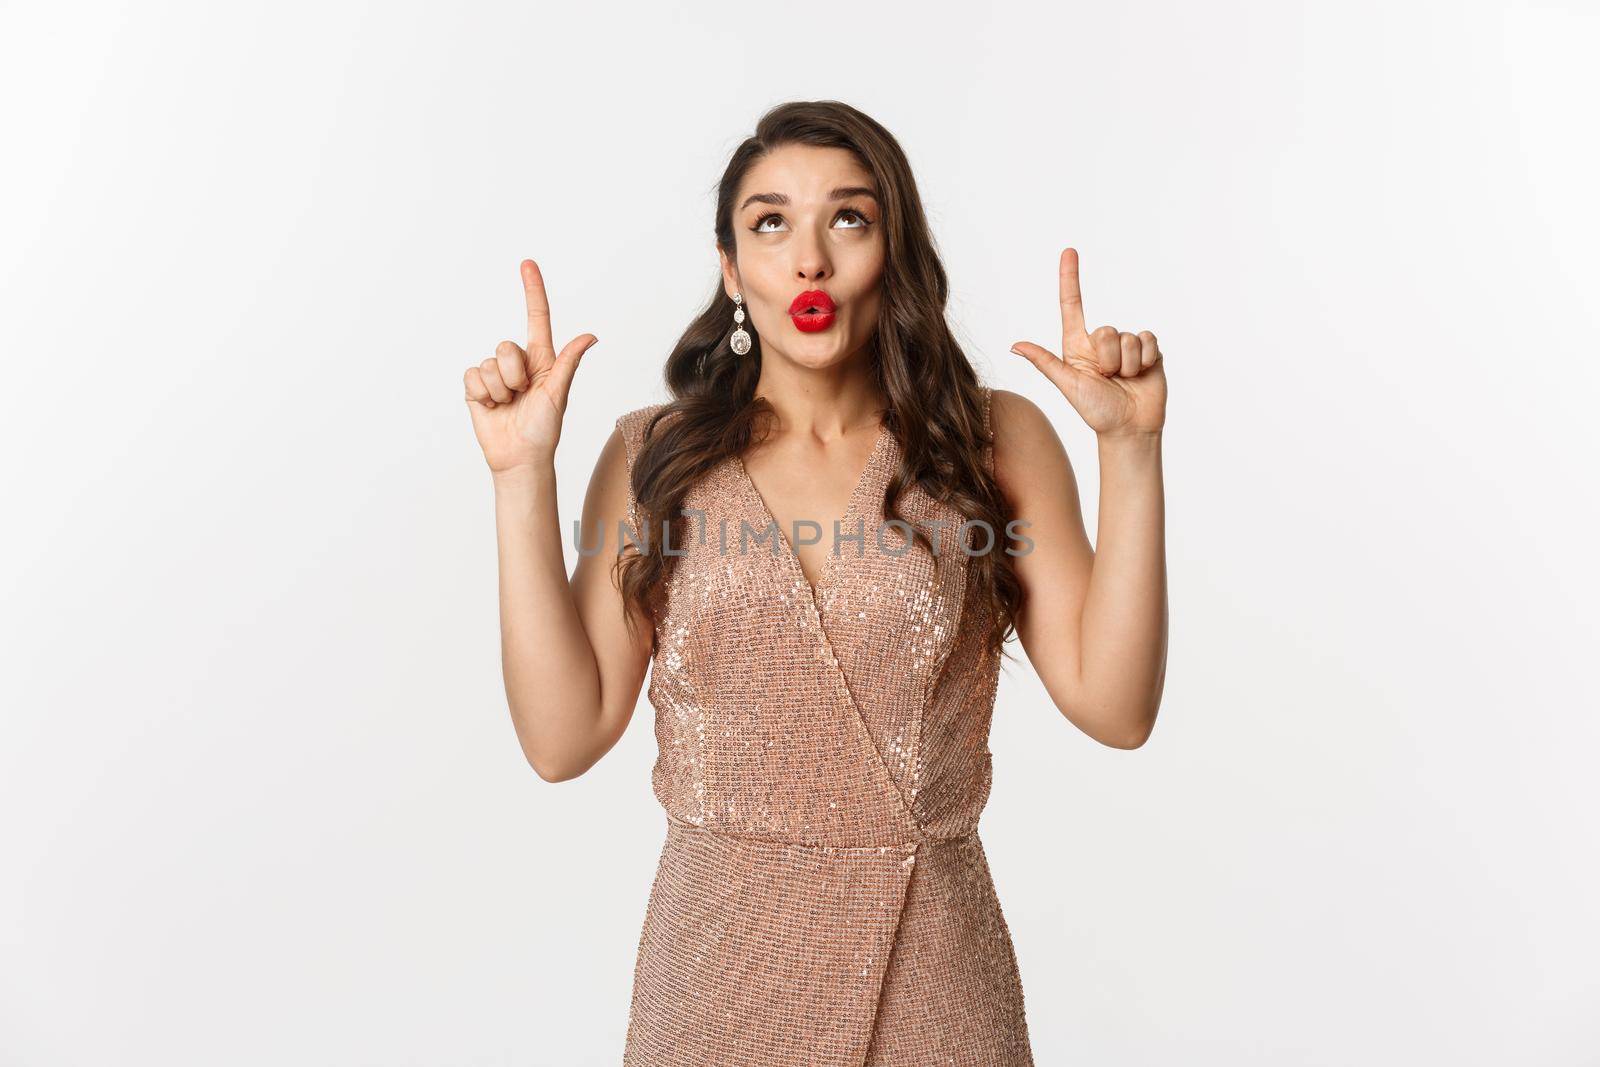 New Year, christmas and celebration concept. Beautiful curious woman in party dress, saying wow and looking at promo offer, pointing fingers up, showing advertisement.